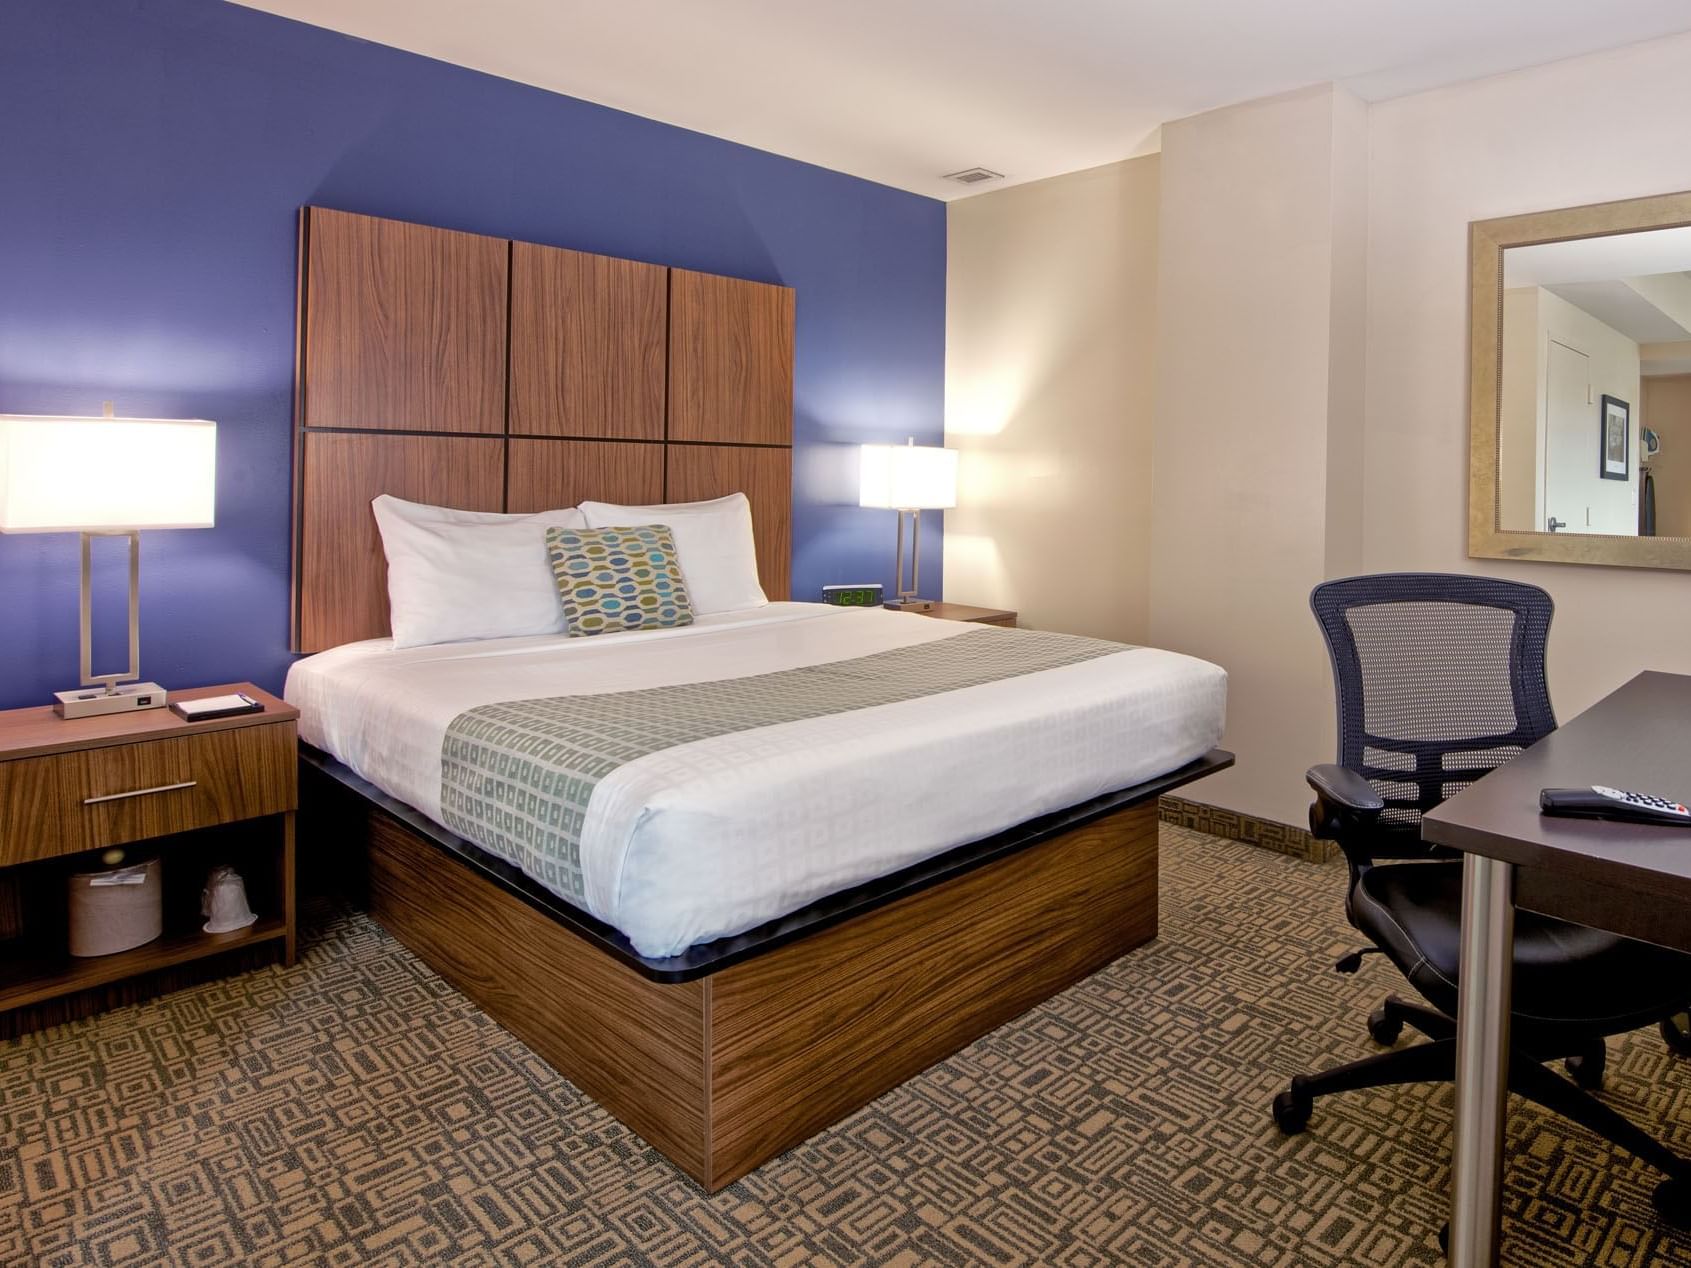 Standard Queen Jr. suite at Kellogg Conference Center